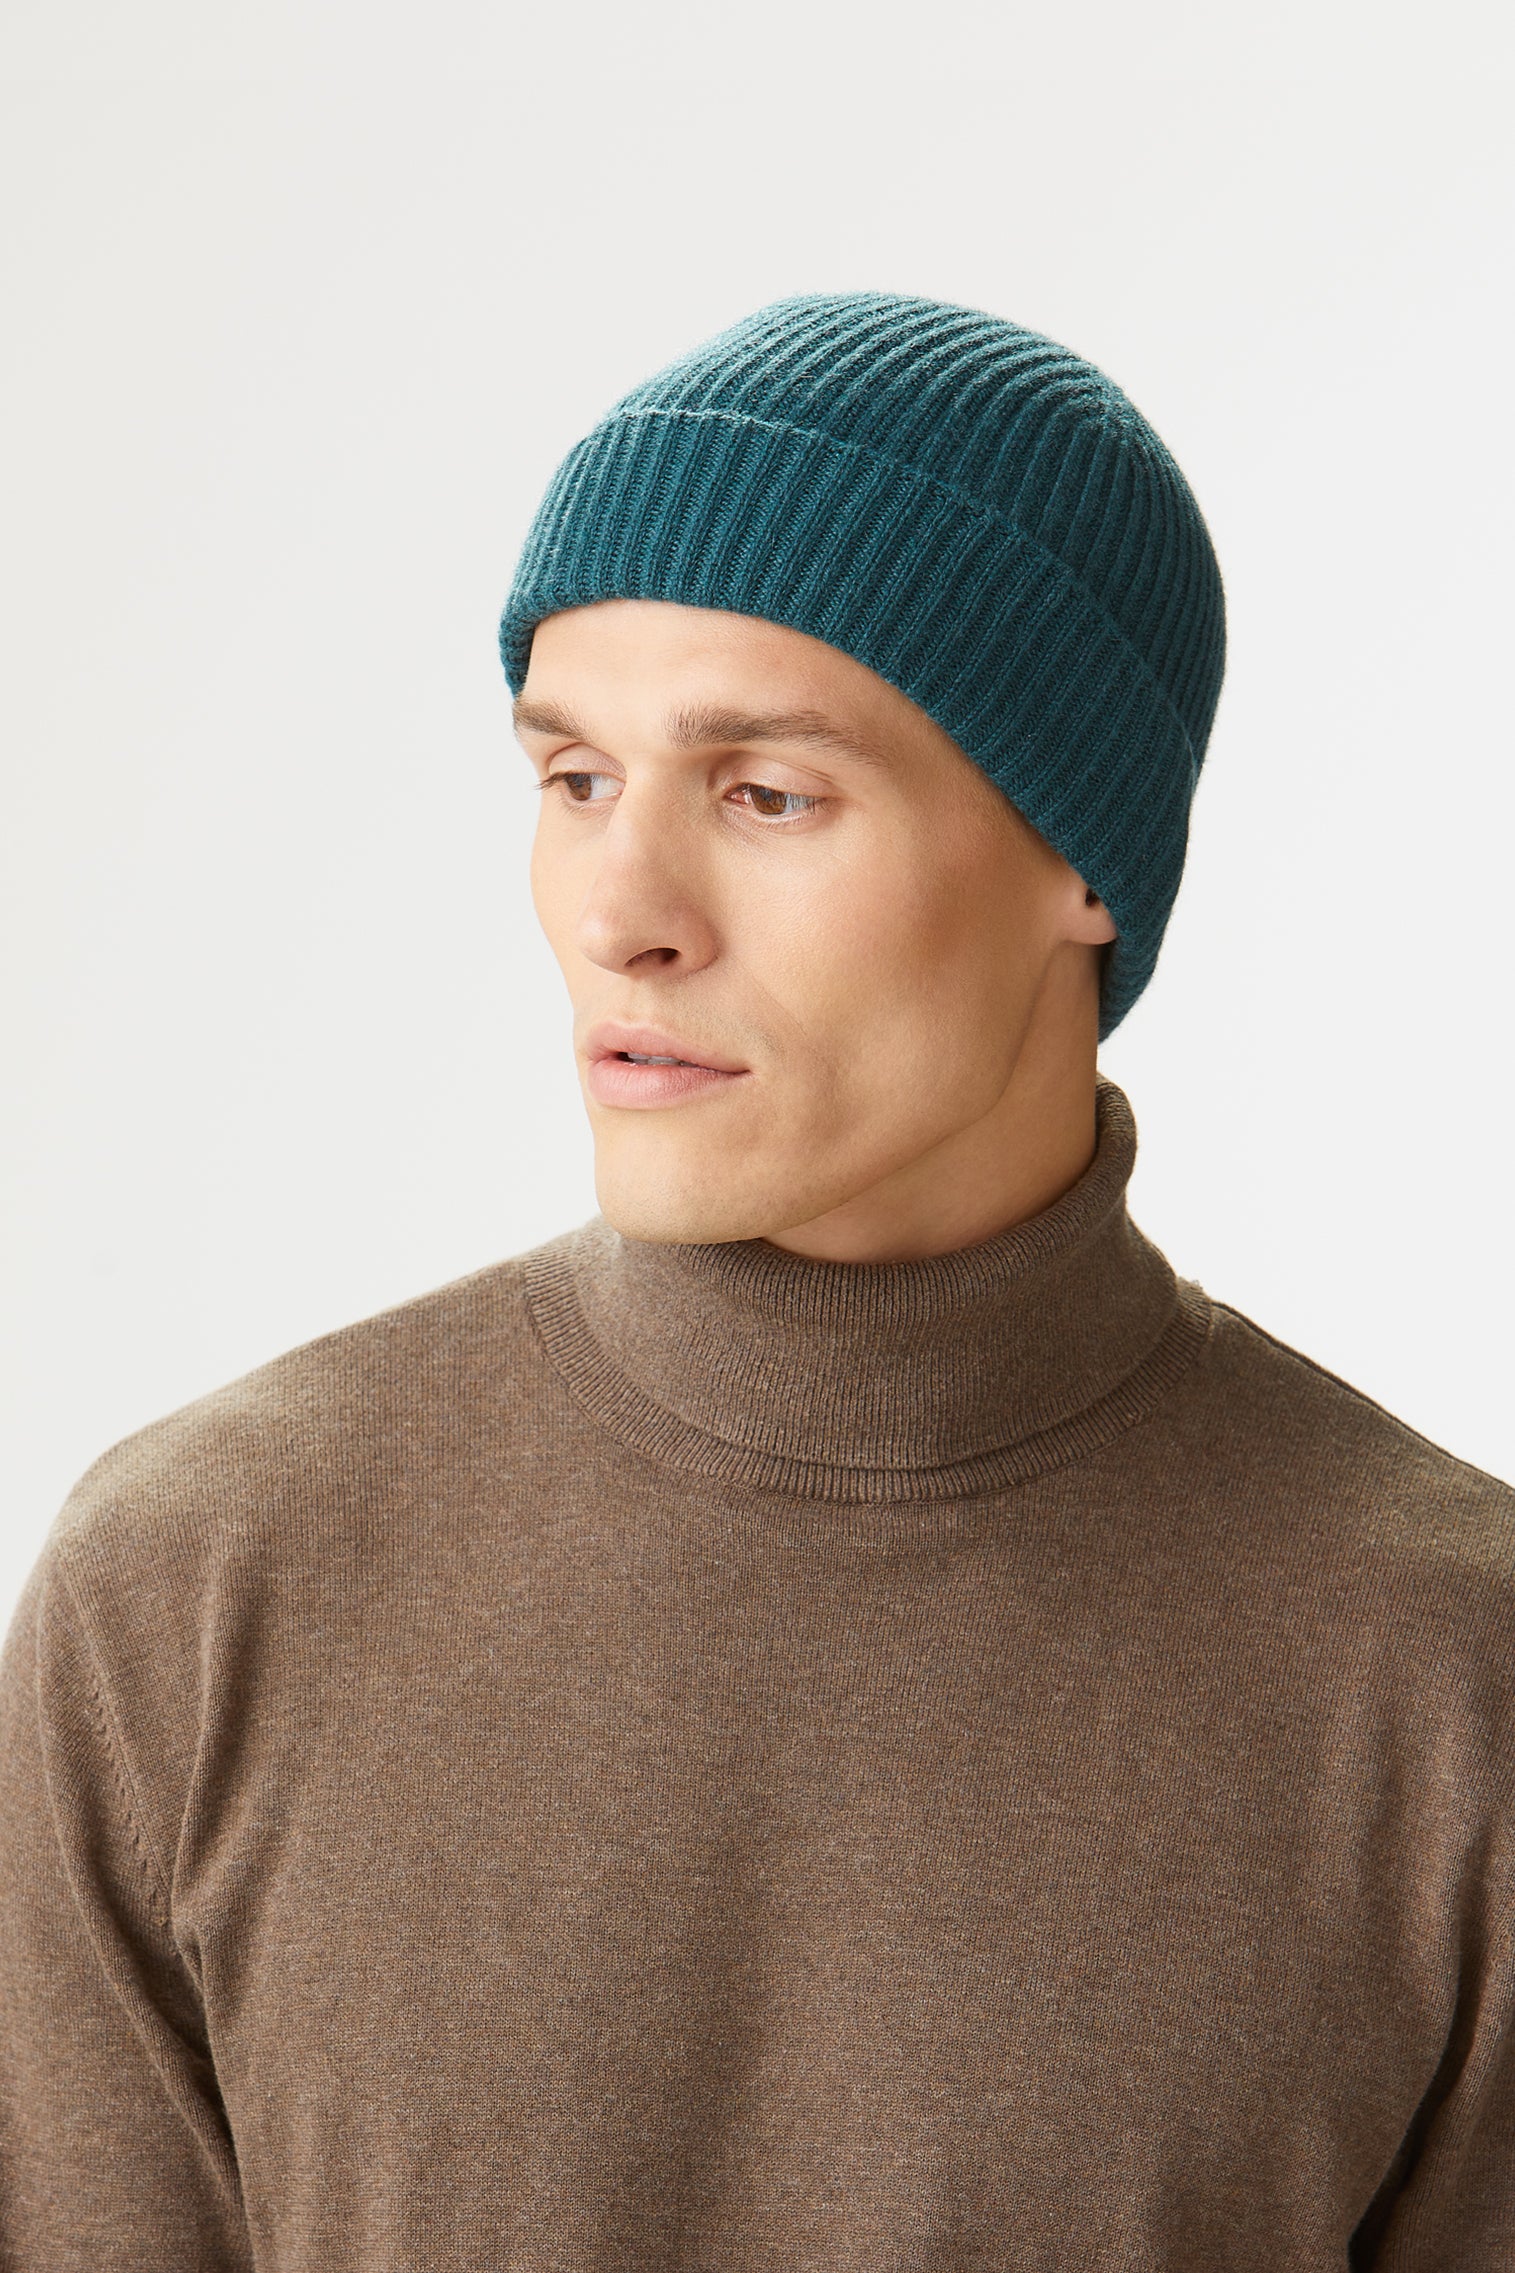 Green Cashmere Ski Beanie - Hats for Tall People - Lock & Co. Hatters London UK